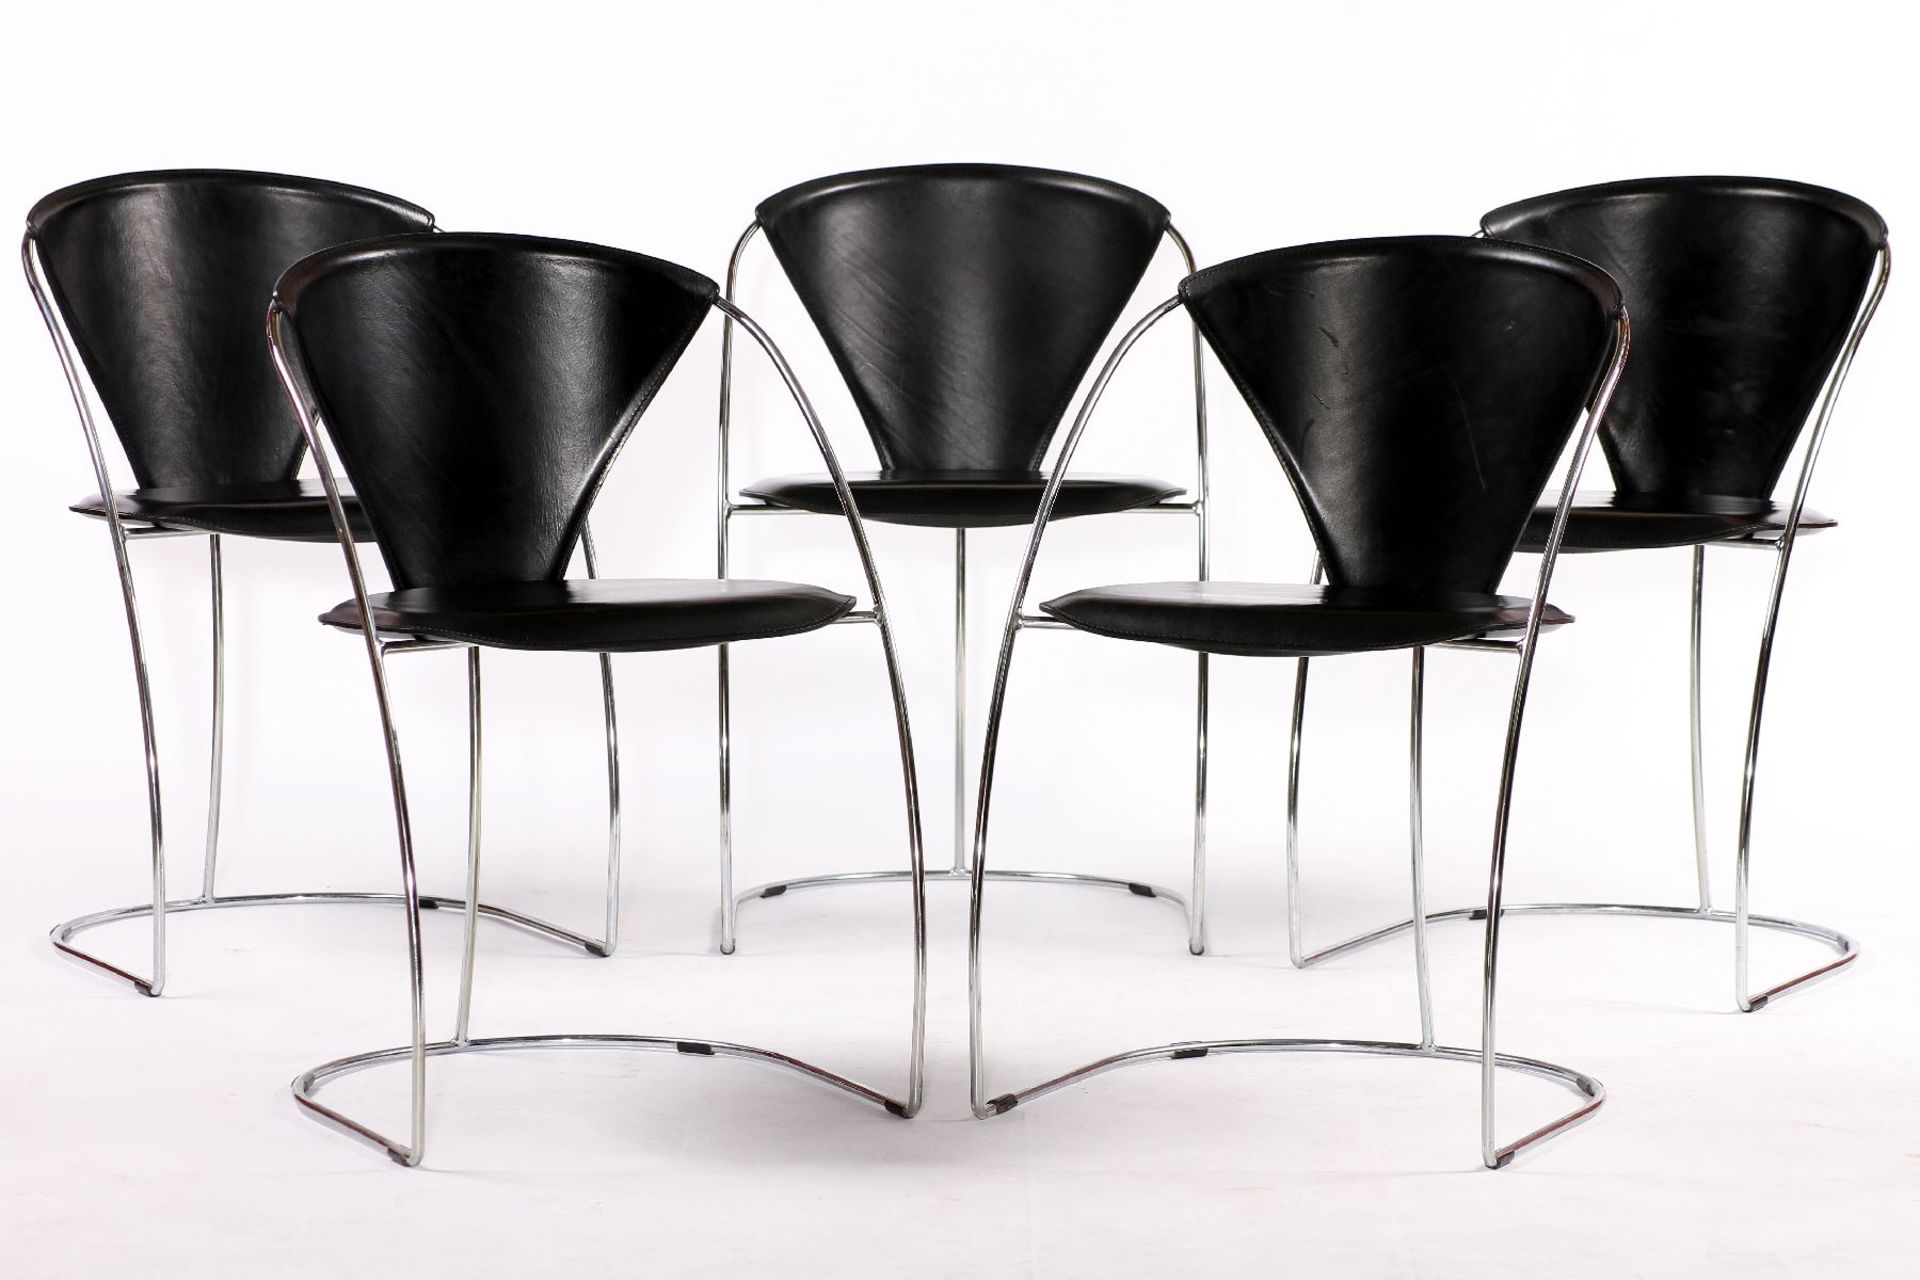 Set of 5 chair armchairs, "Arrben", Italy, 80s, frame made of chrome-plated round steel, seat and